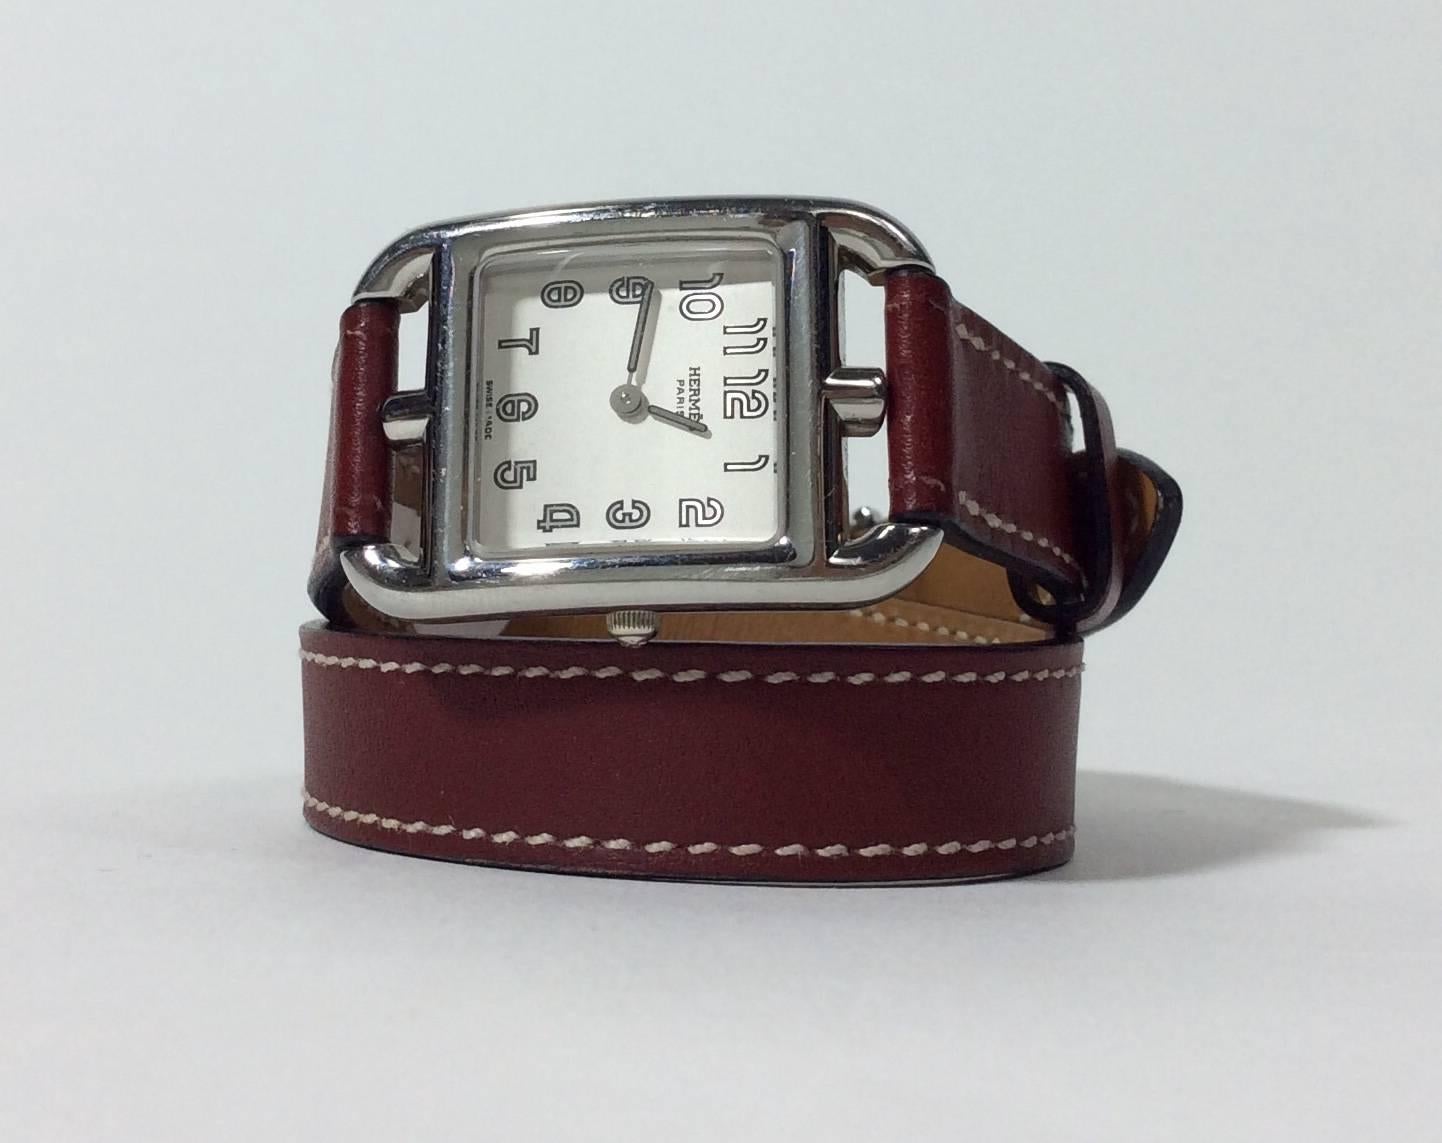 Brown Leather Wraparound Watch
White face with silver retro numbers
Brown leather band adjustable from 11.5-13 inches 
0.5 inches thick
Hermes logo engraved on back of face